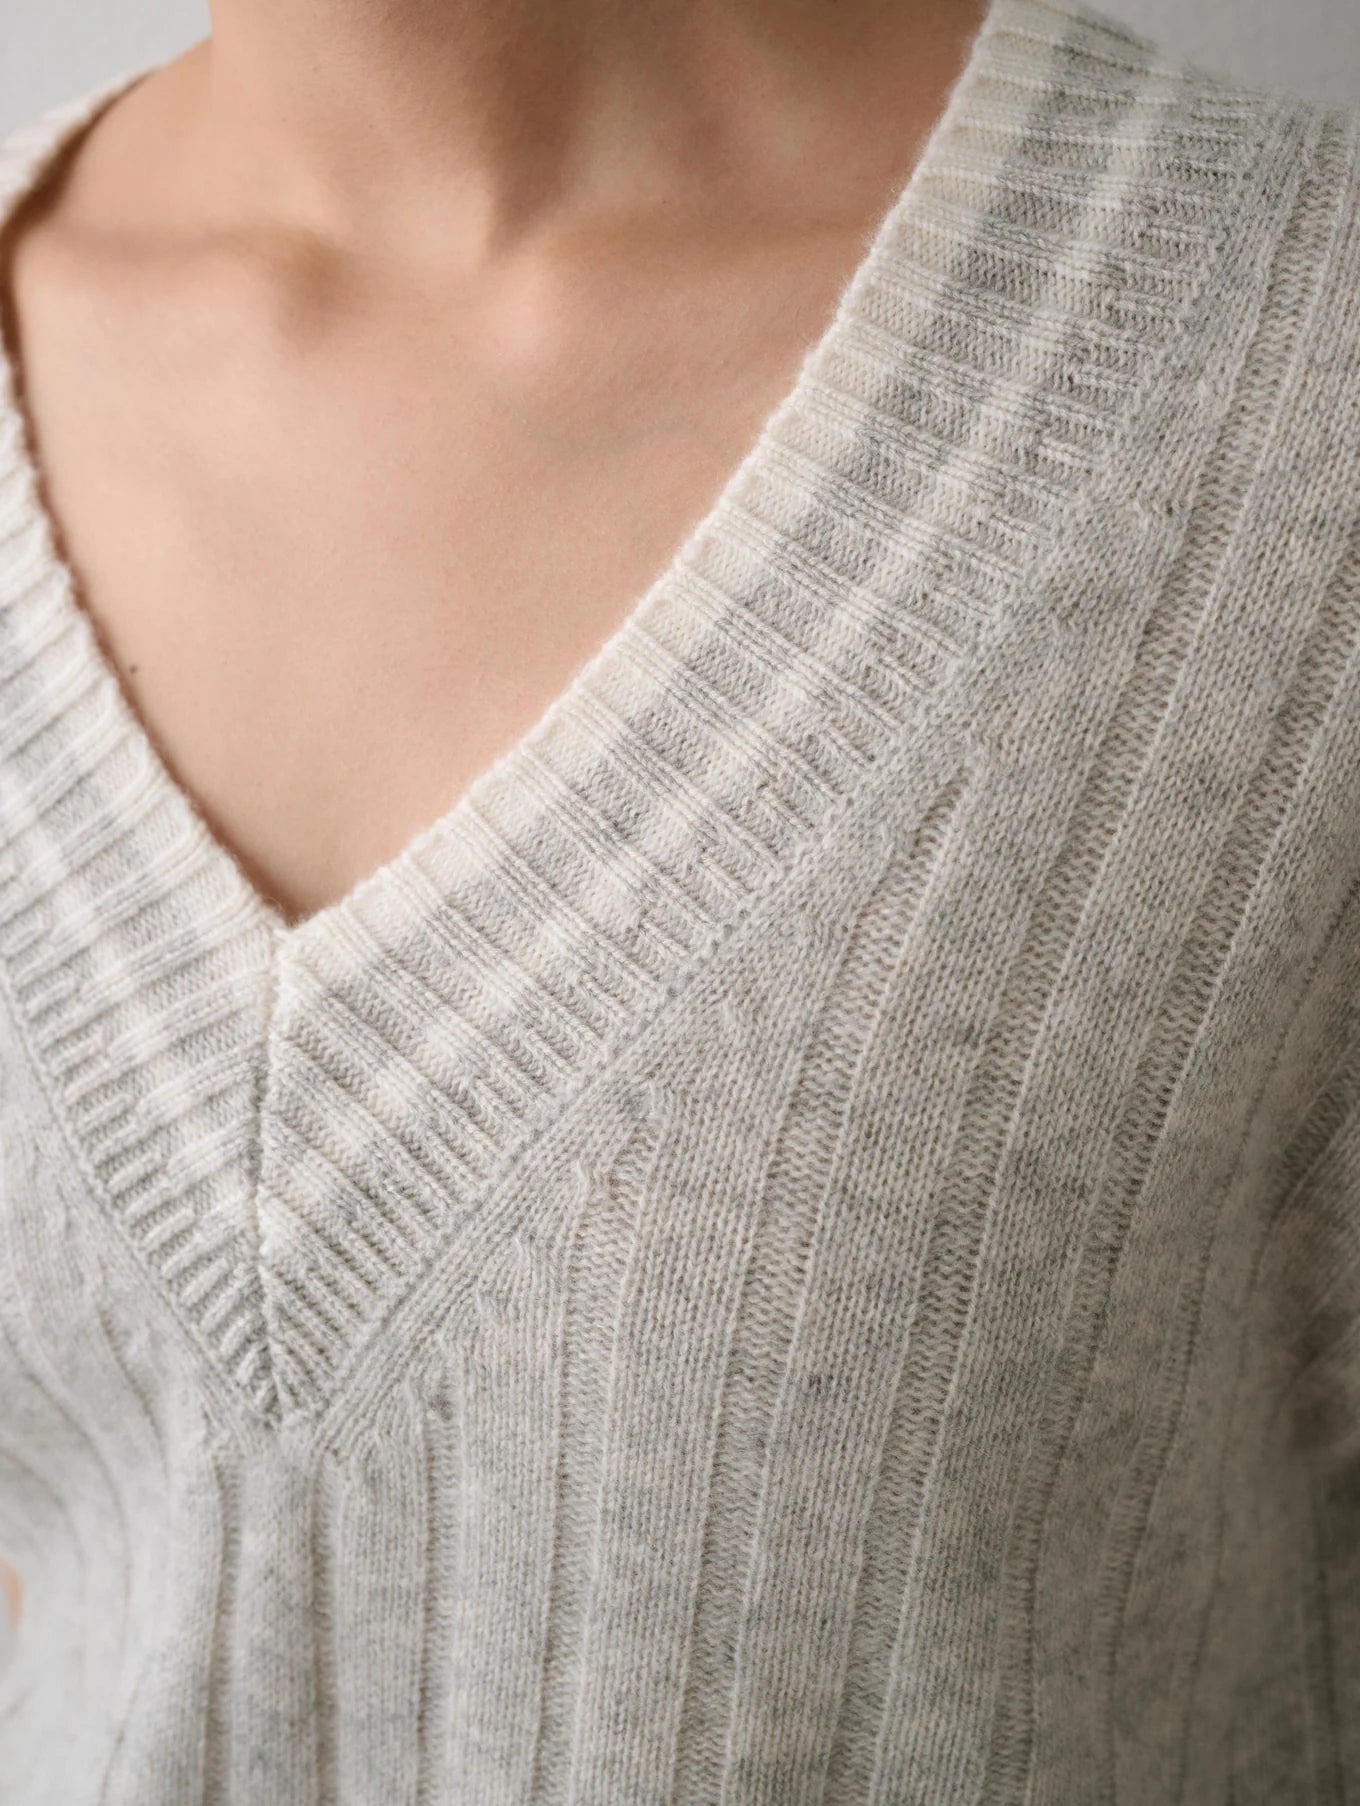 Front neckline detail view of the White + Warren Cashmere Varsity Ribbed V-Neck Sweater in the colors Misty Grey Heather and White